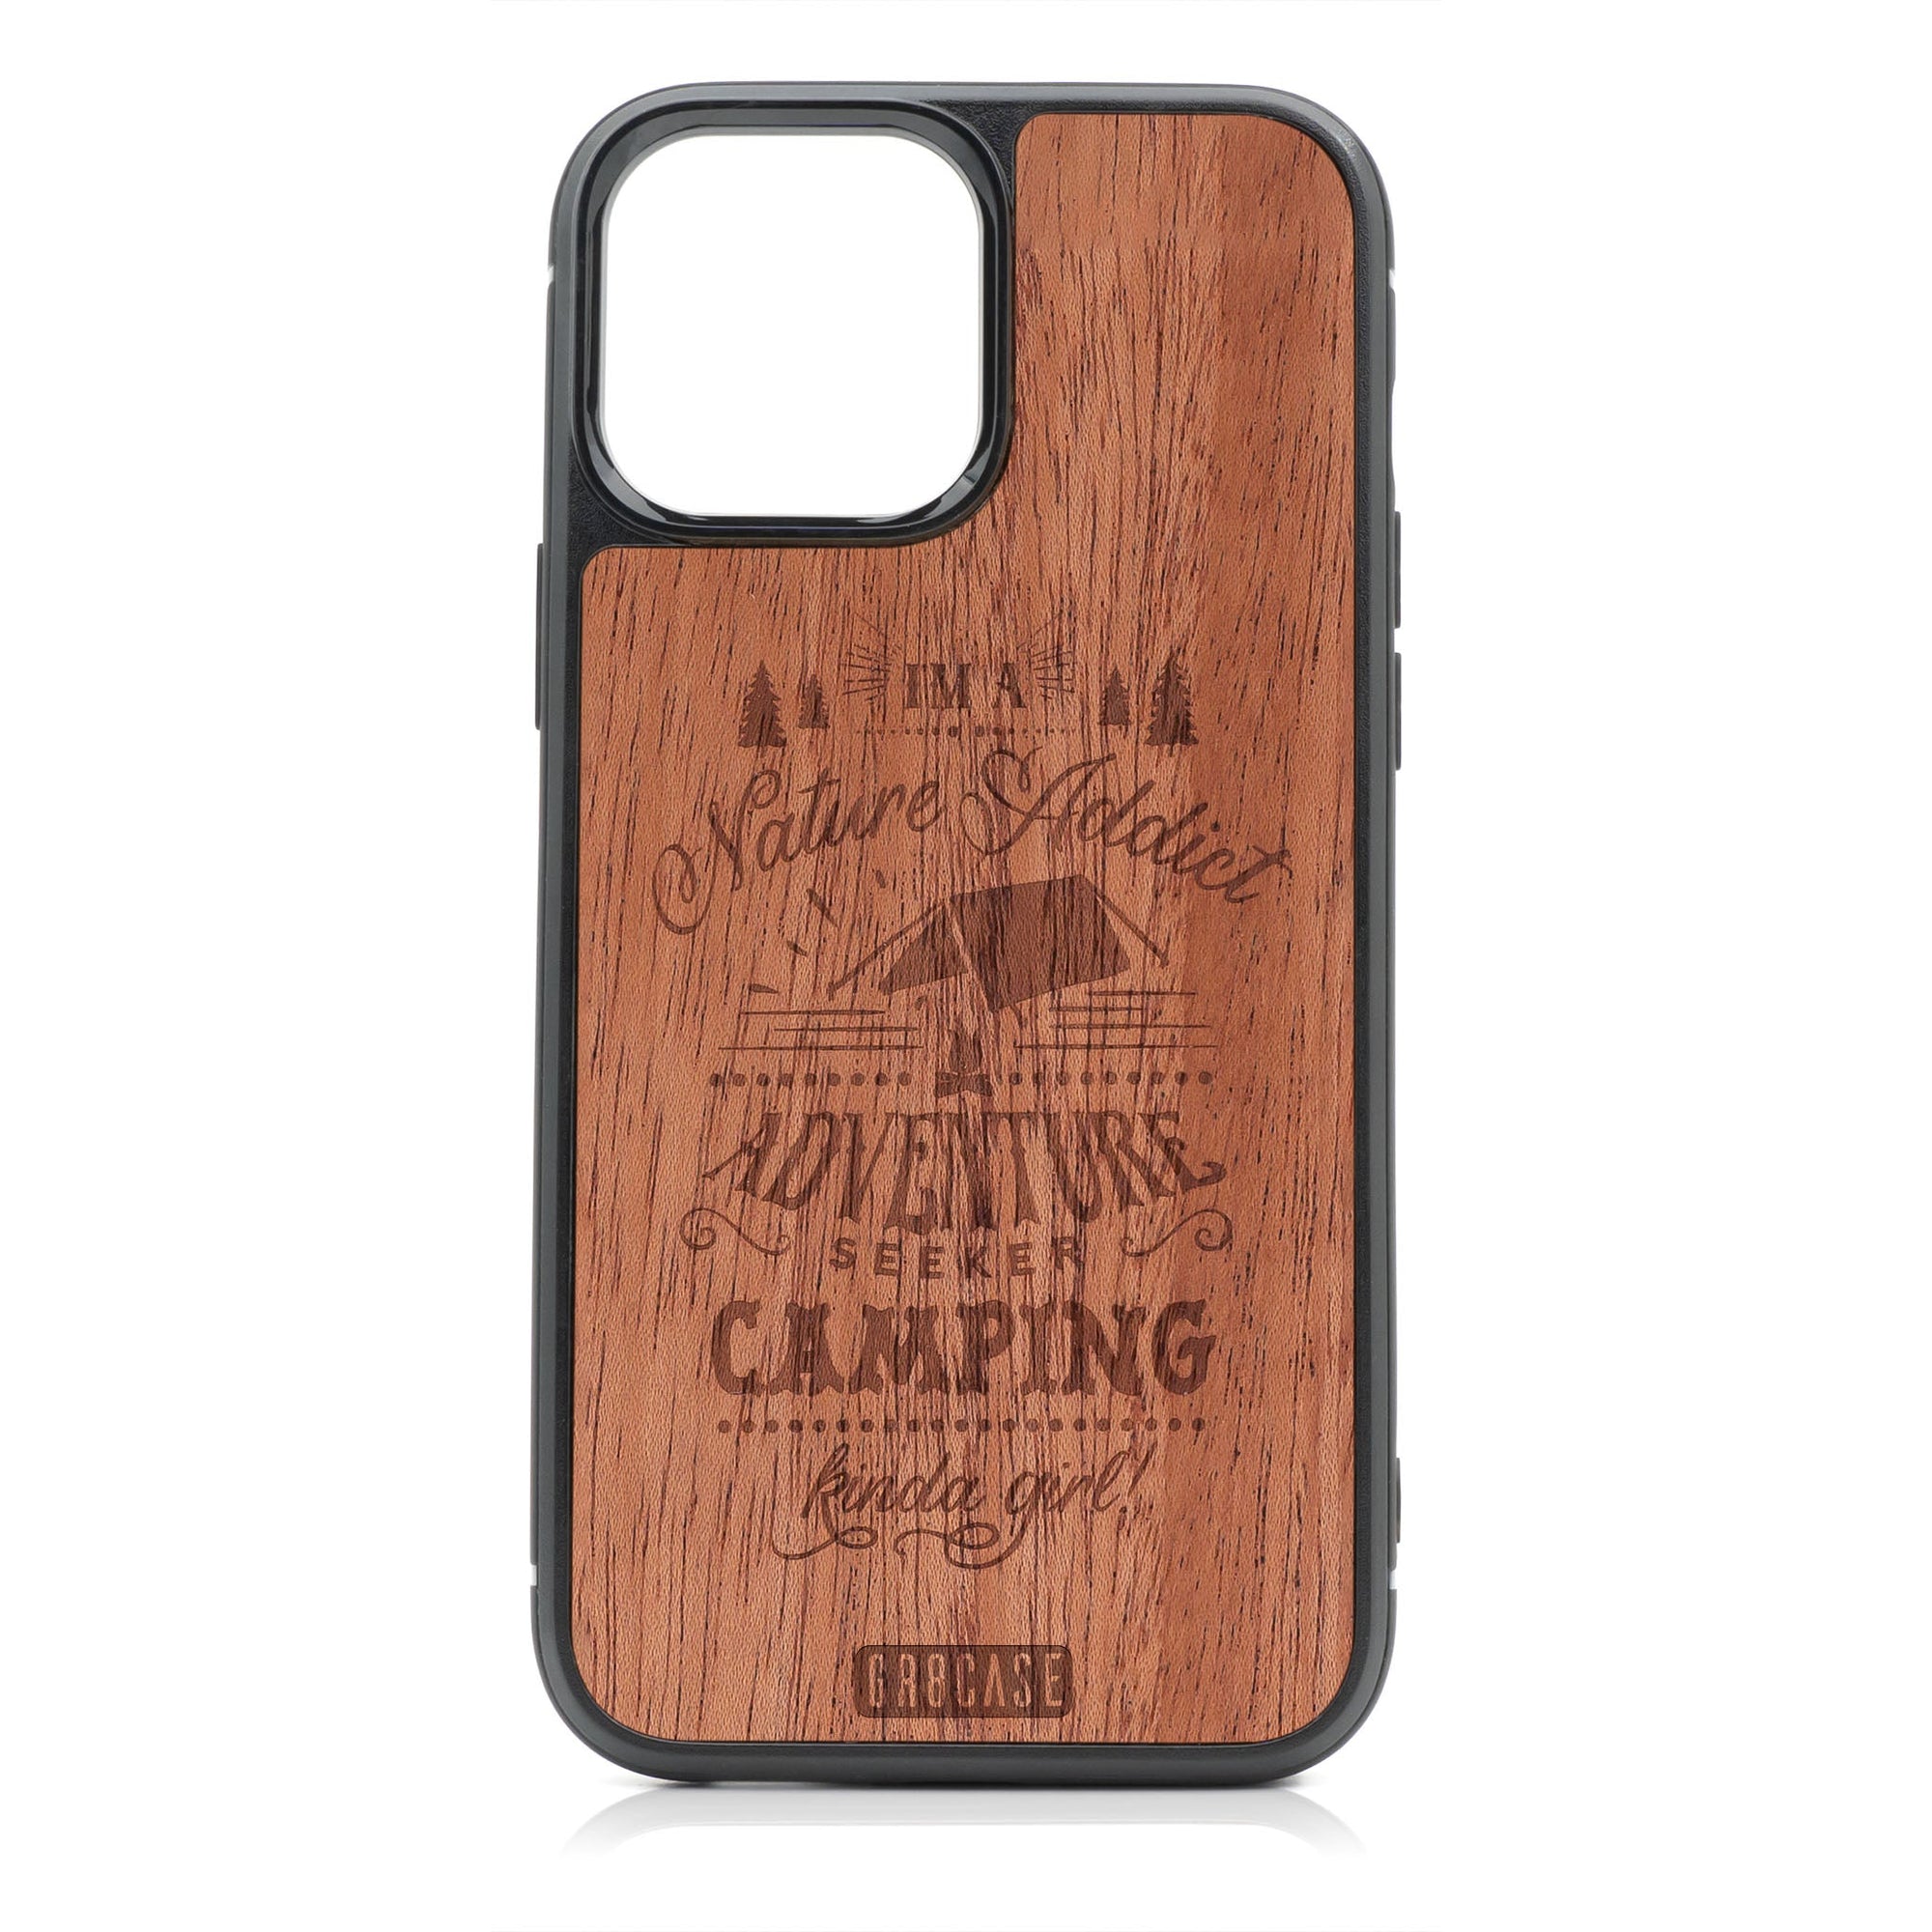 I'm A Nature Addict Adventure Seeker Camping Kinda Girl Design Wood Case For iPhone 14 Pro Max